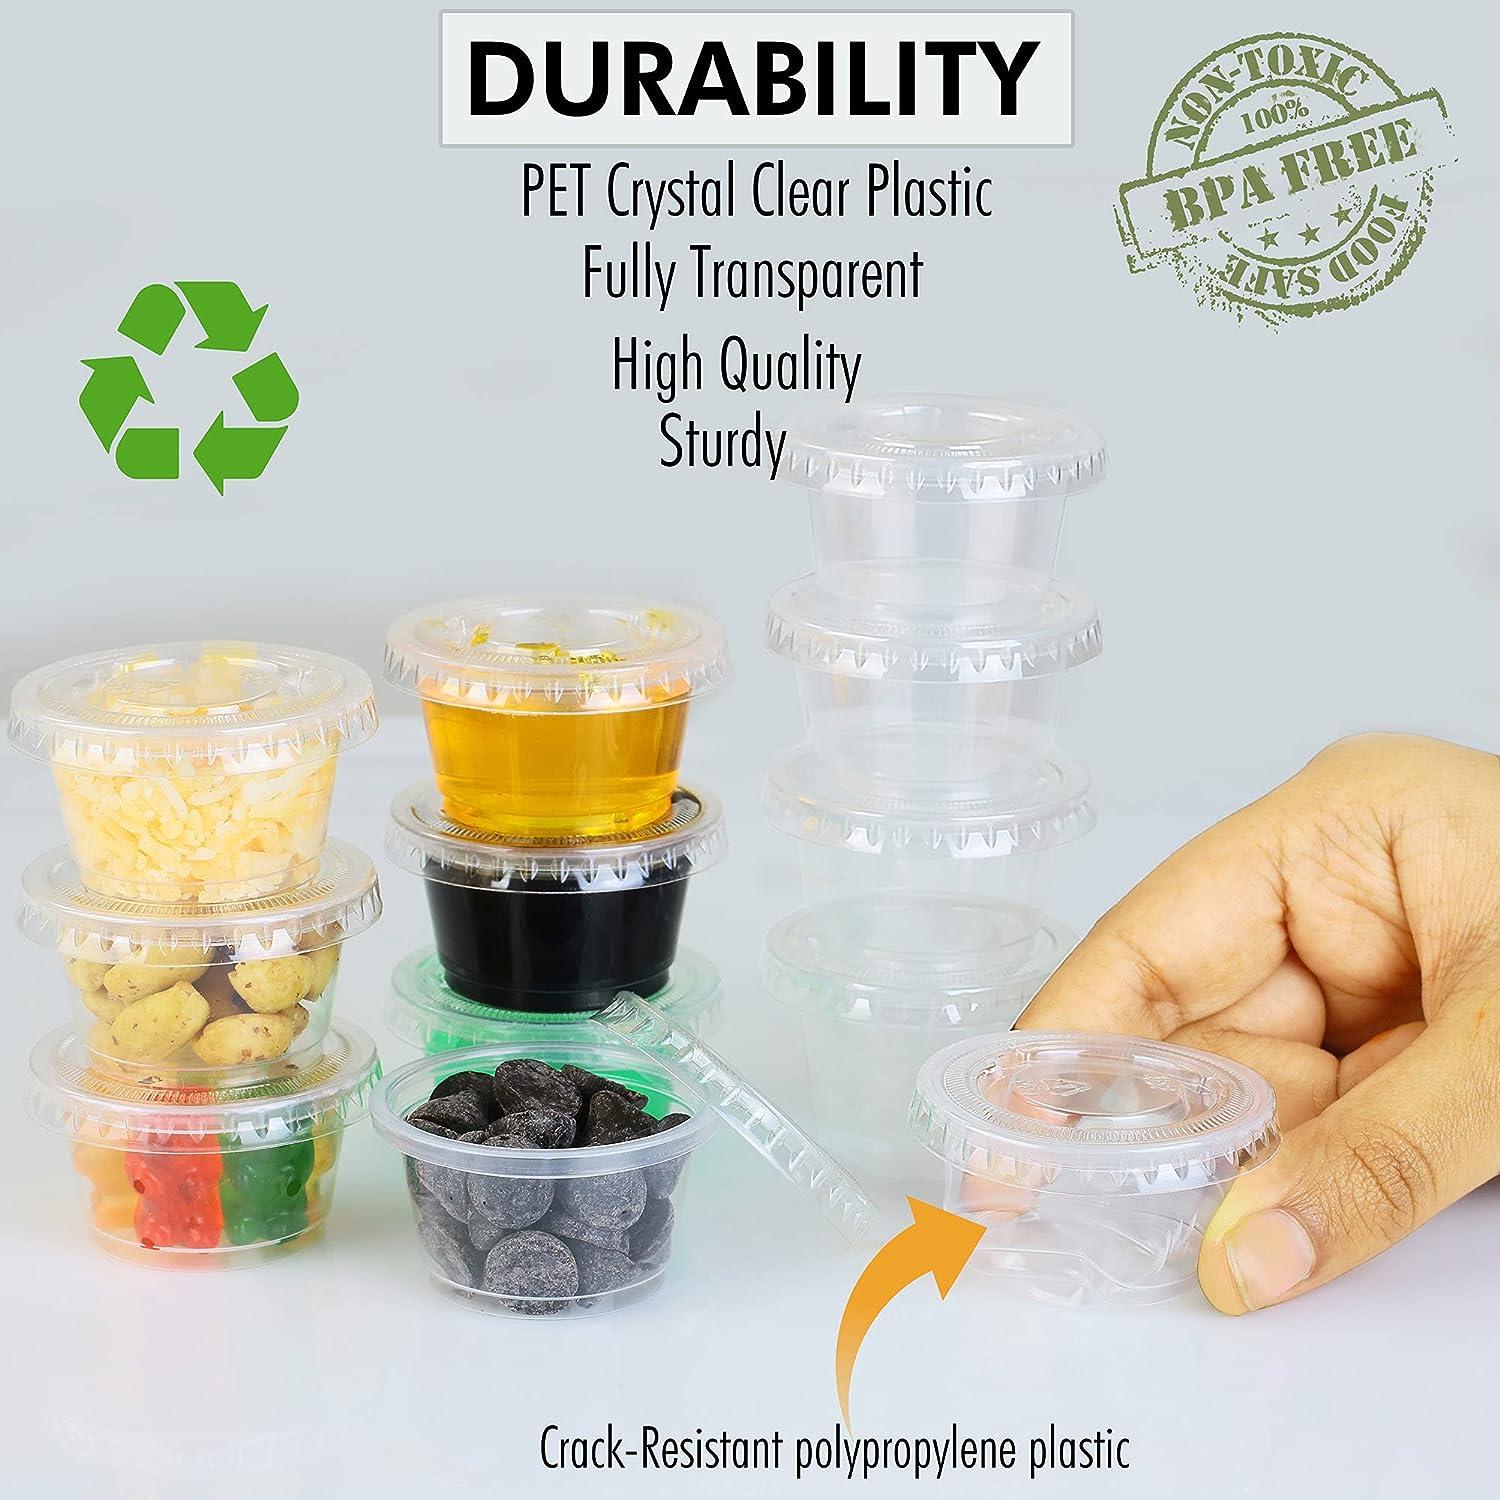 0.75 Oz) Medicine Cups with Lids - Condiment Containers, Small Sample Cups,  Leak-Resistant, Tight fit, Easy Snap-on Lids - Clear and Fully Transparent.  (Bulk Pack 200 Cups + 200 Lids) 3/4 OZ - 200 Sets